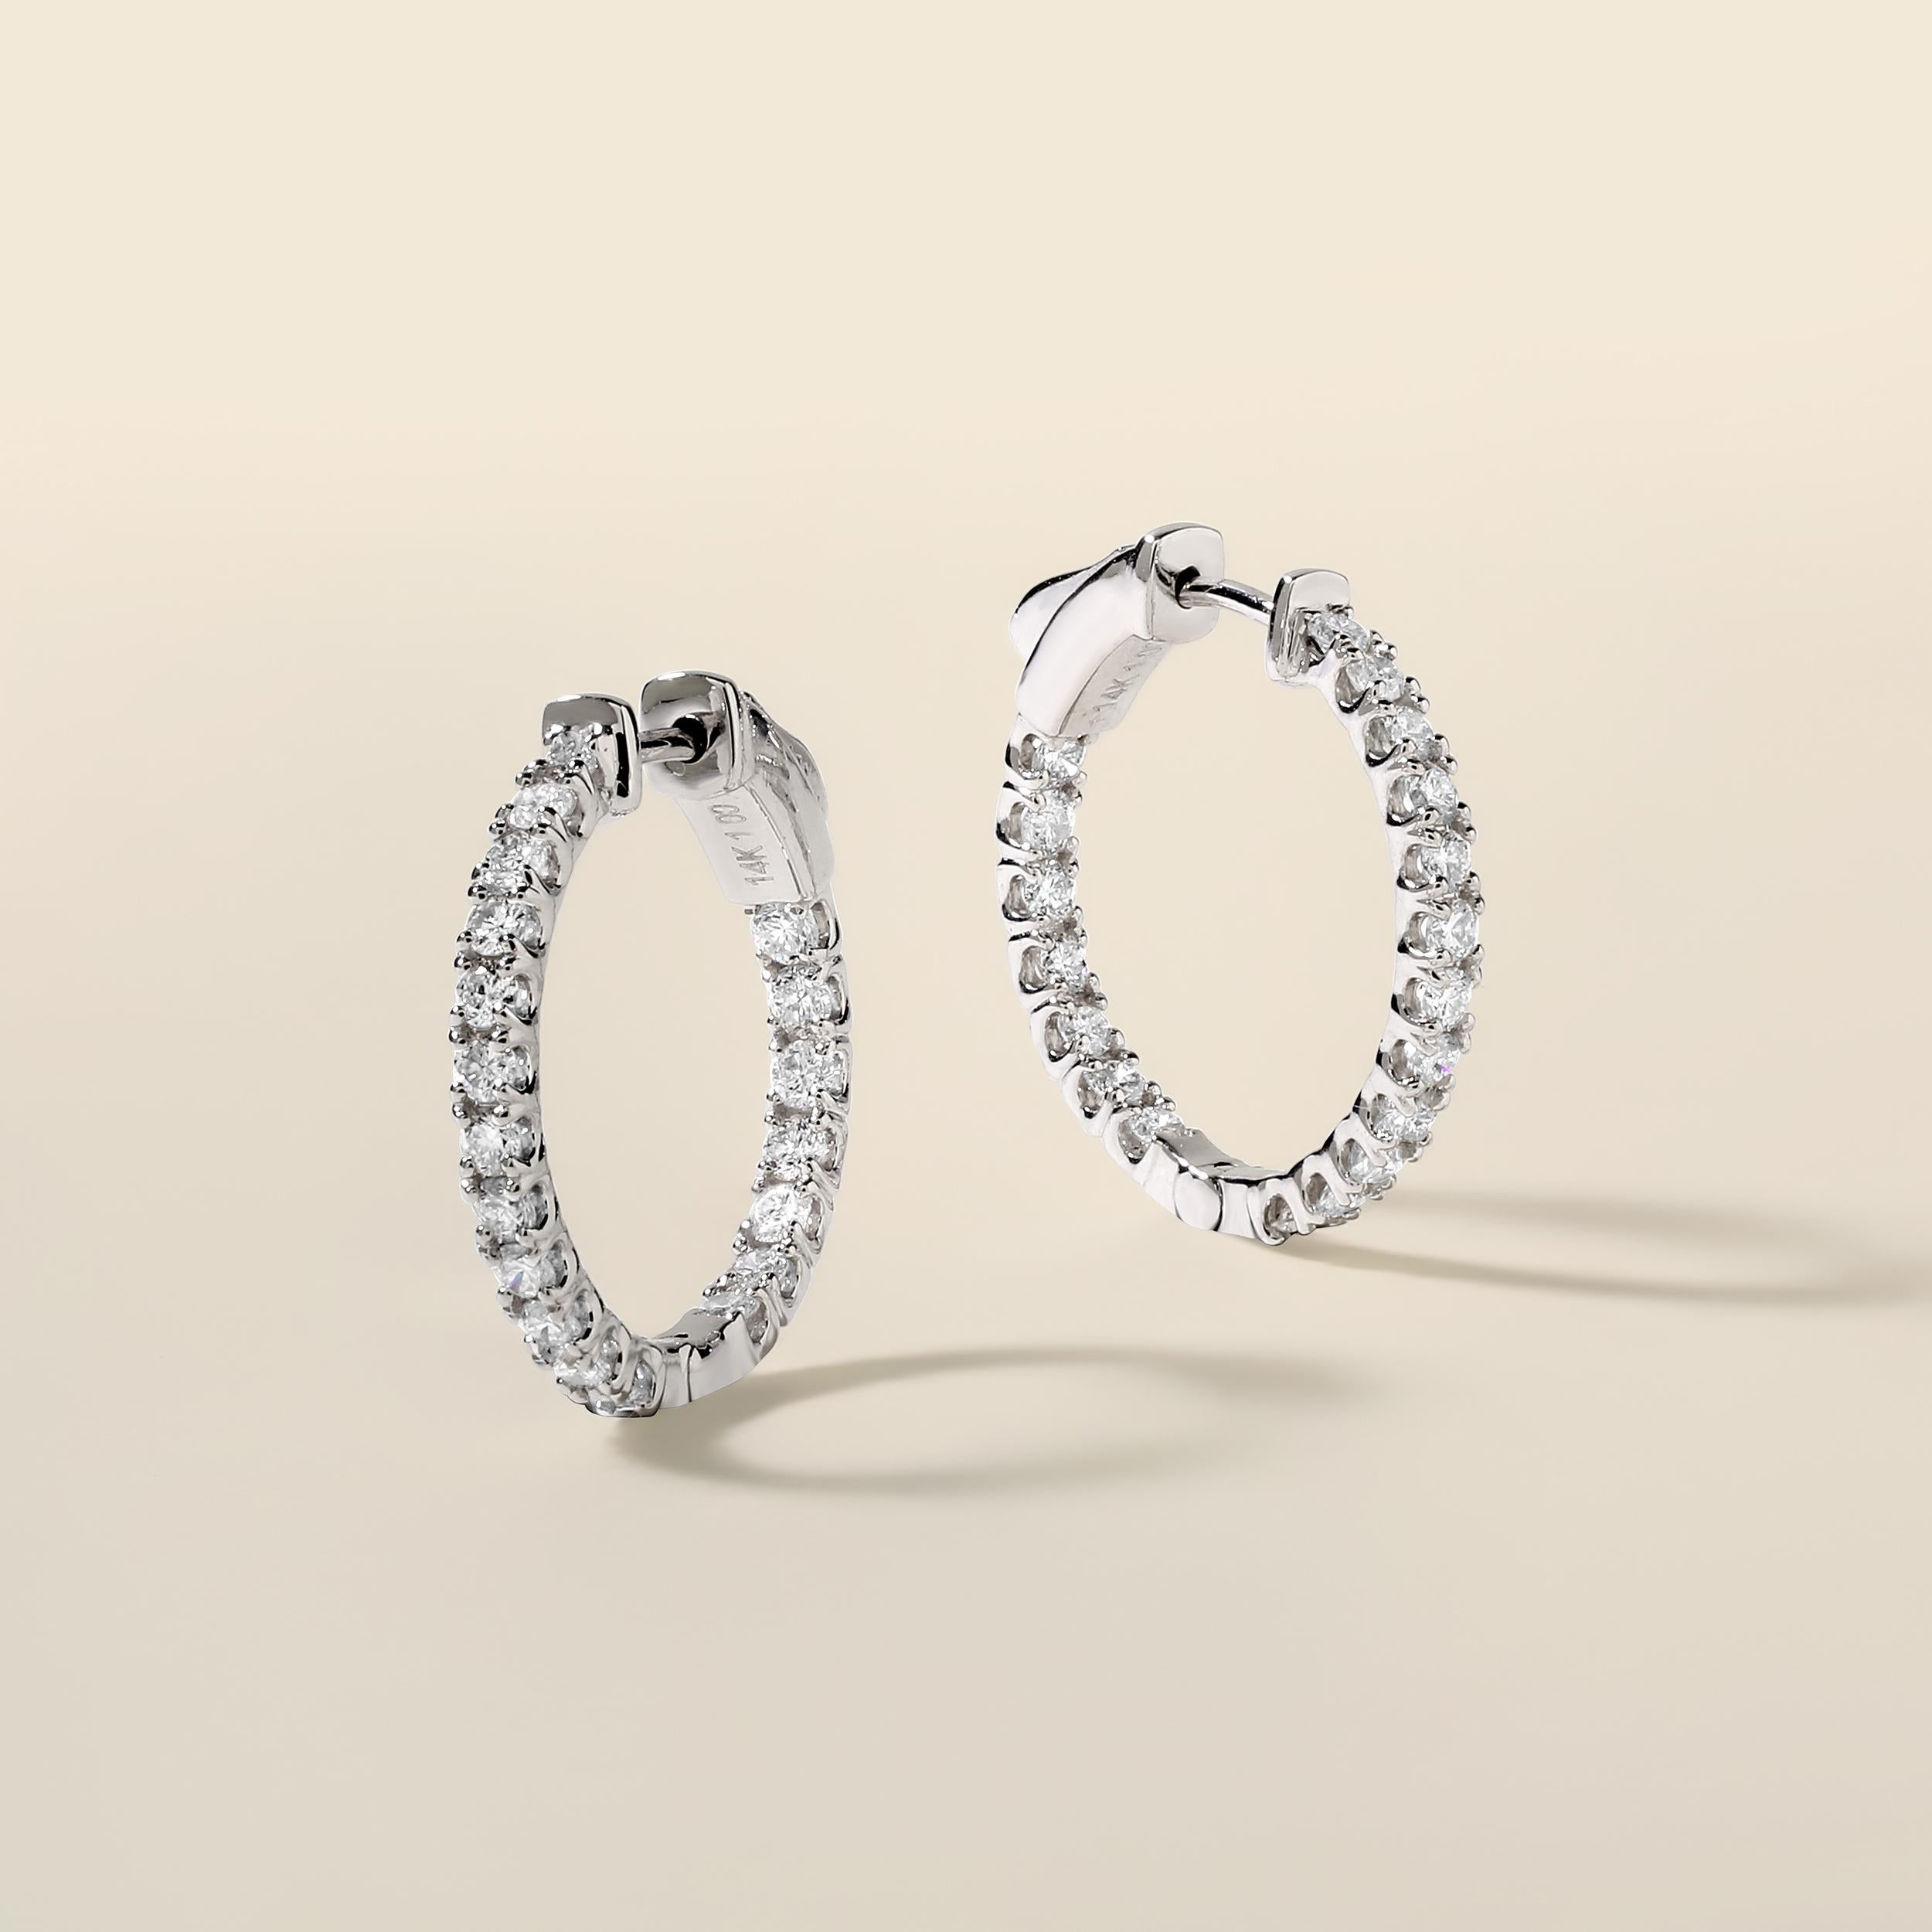 Crafted in 3.93 grams of 14K White Gold, the earrings contains 38 stones of Round Diamonds with a total of 1 carat in G-H color and SI clarity.

CONTEMPORARY AND TIMELESS ESSENCE: Crafted in 14-karat/18-karat with 100% natural diamond and designed